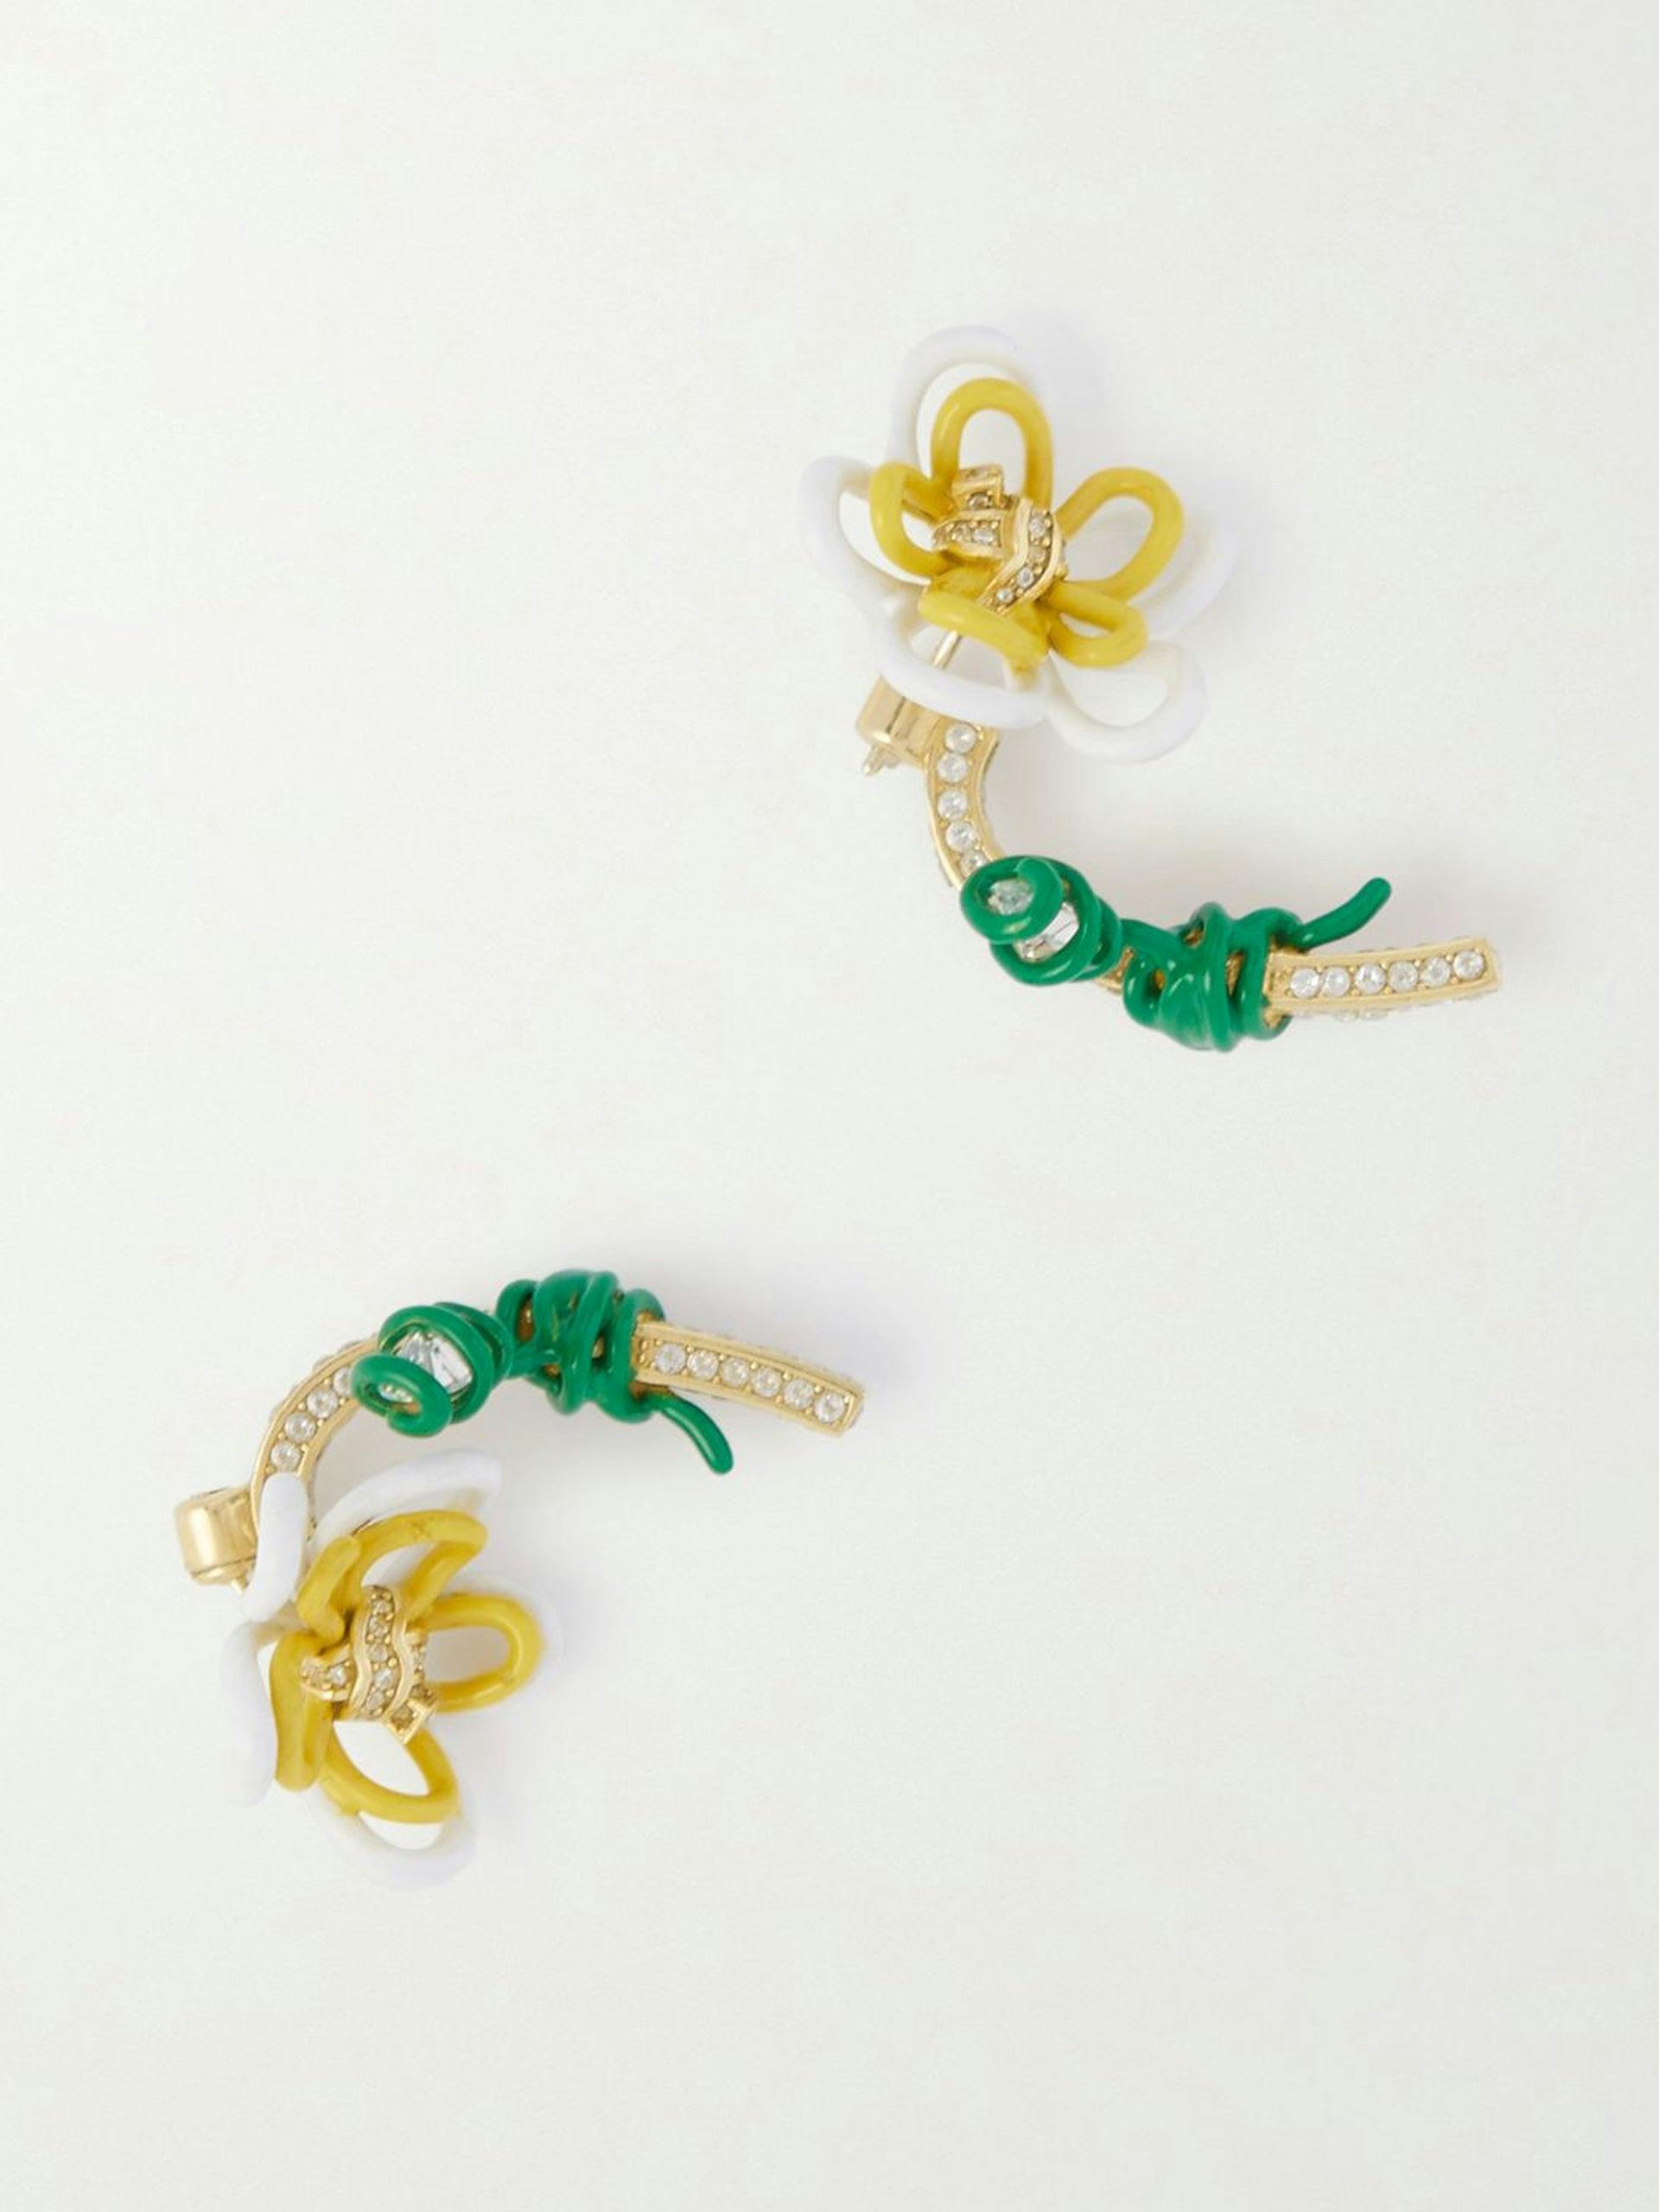 White, green and gold earrings